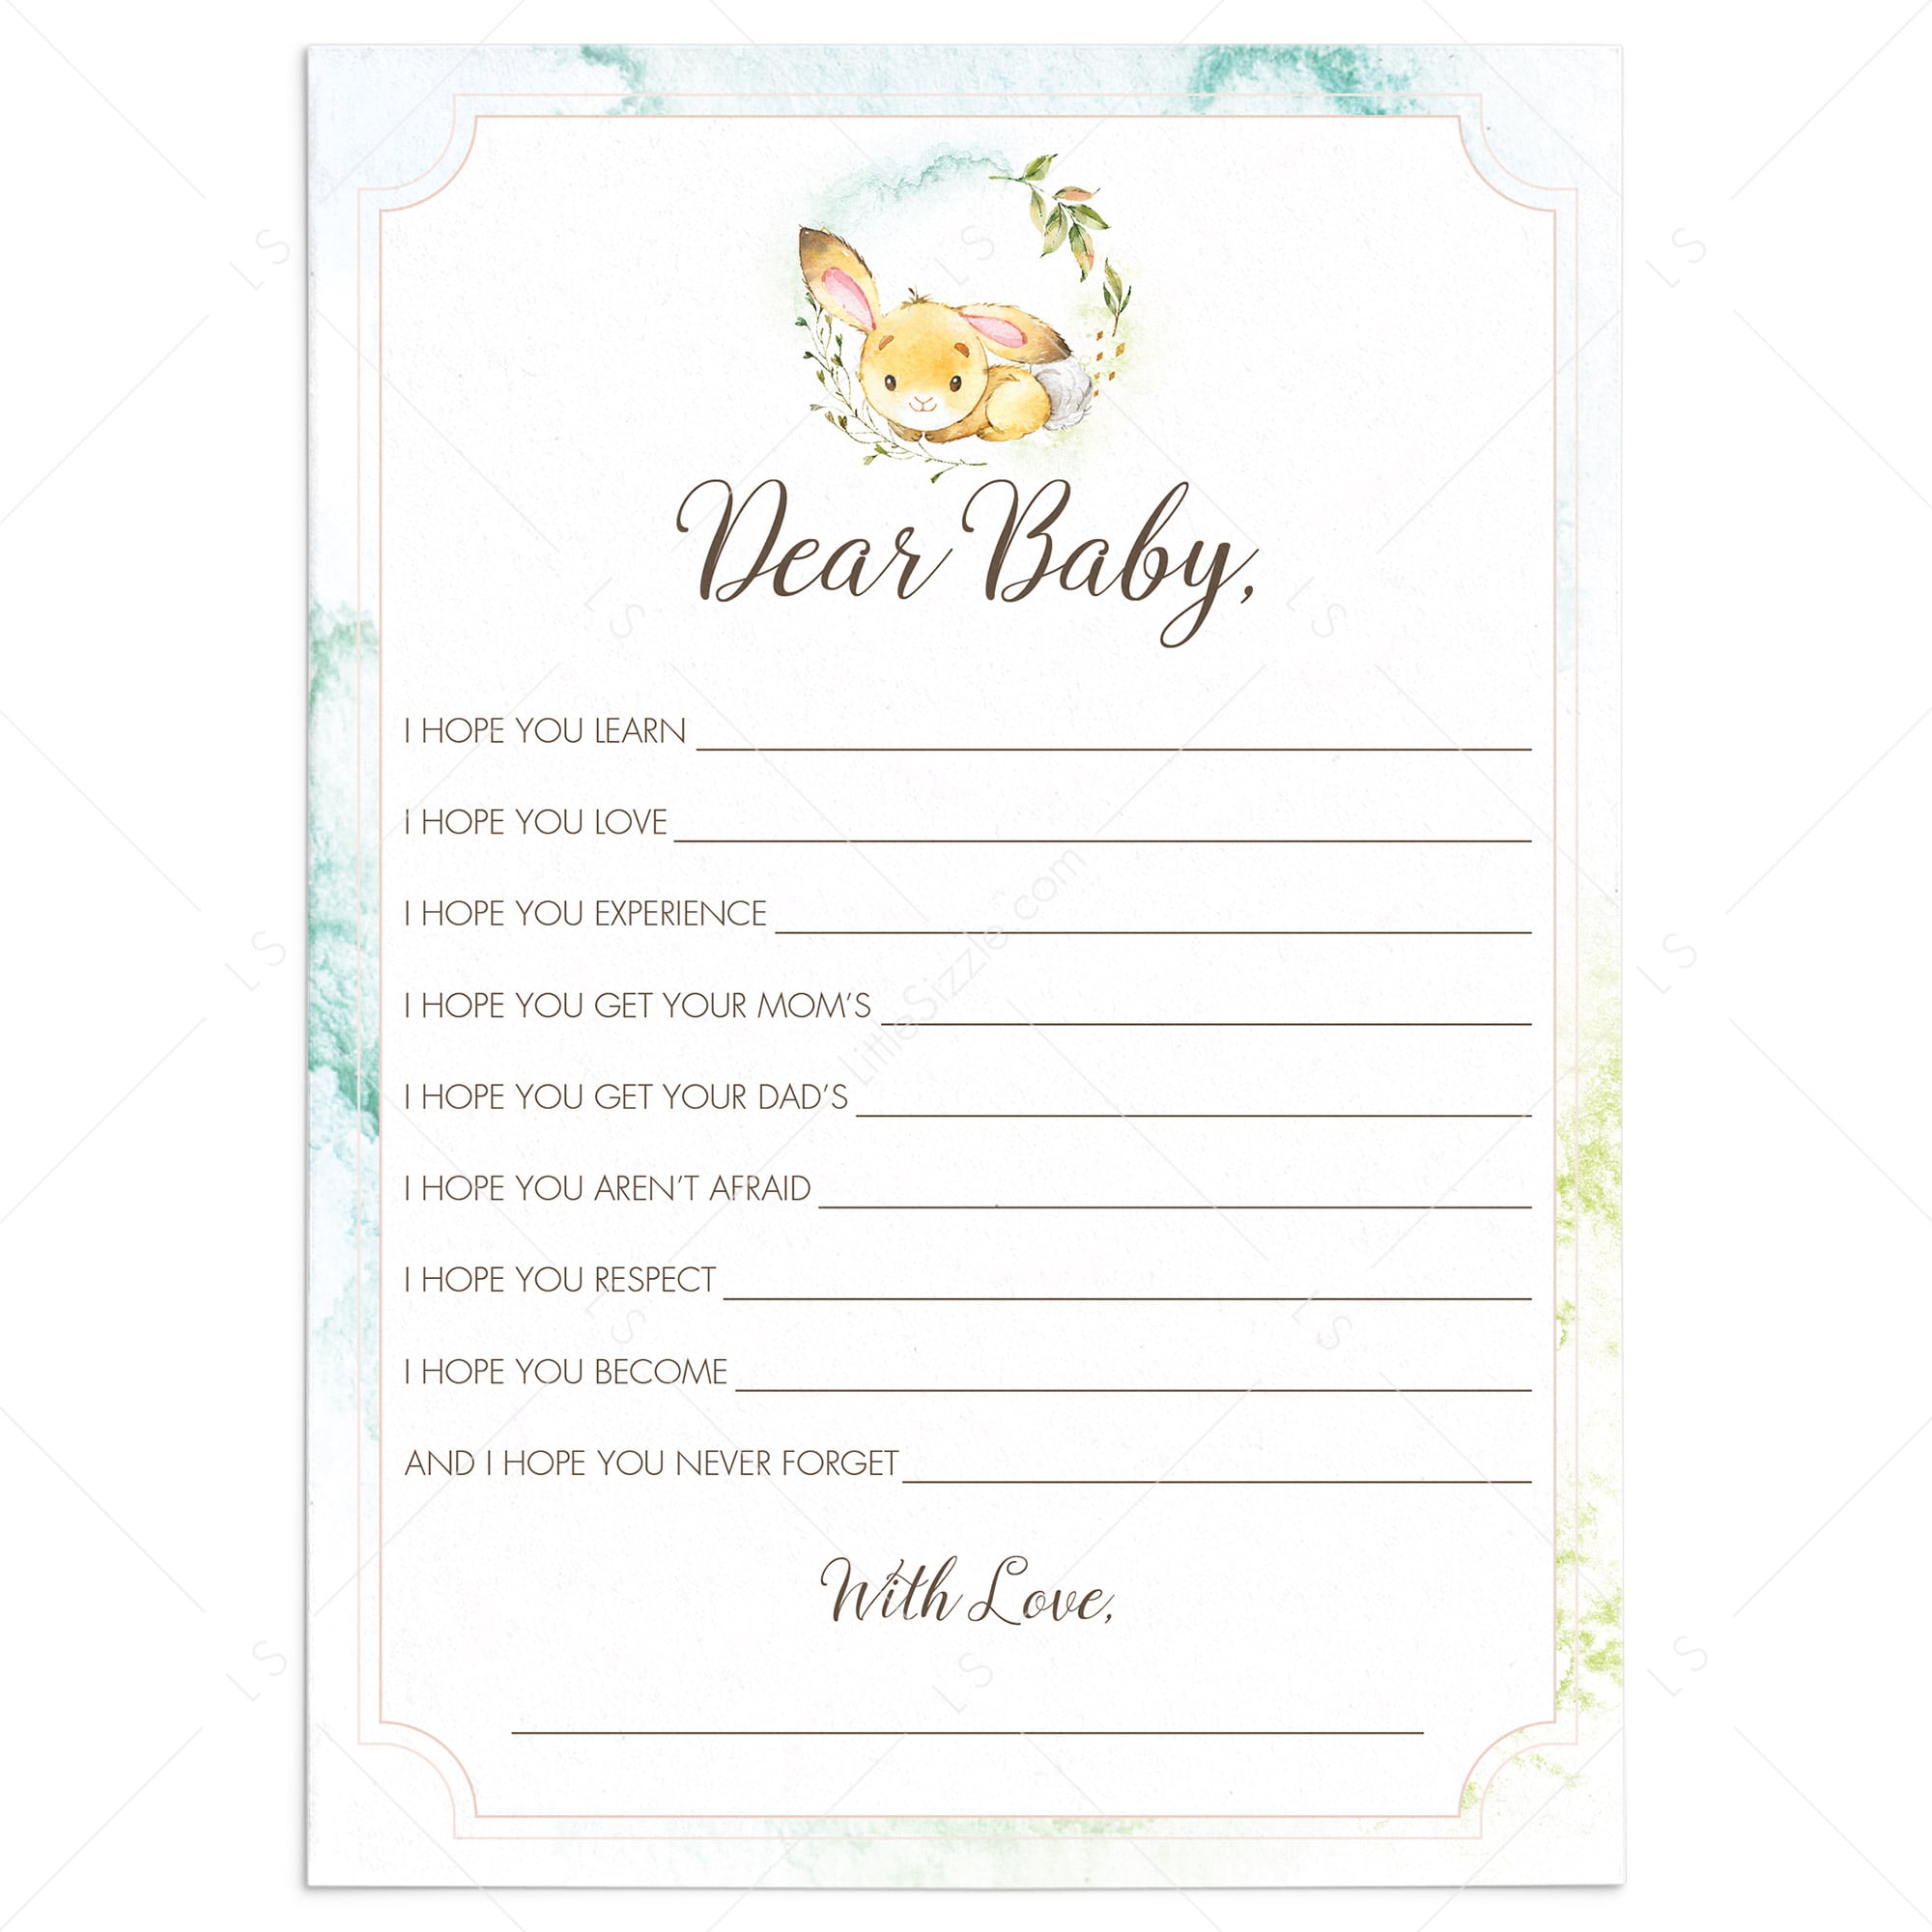 Dear baby bunny shower printable by LittleSizzle